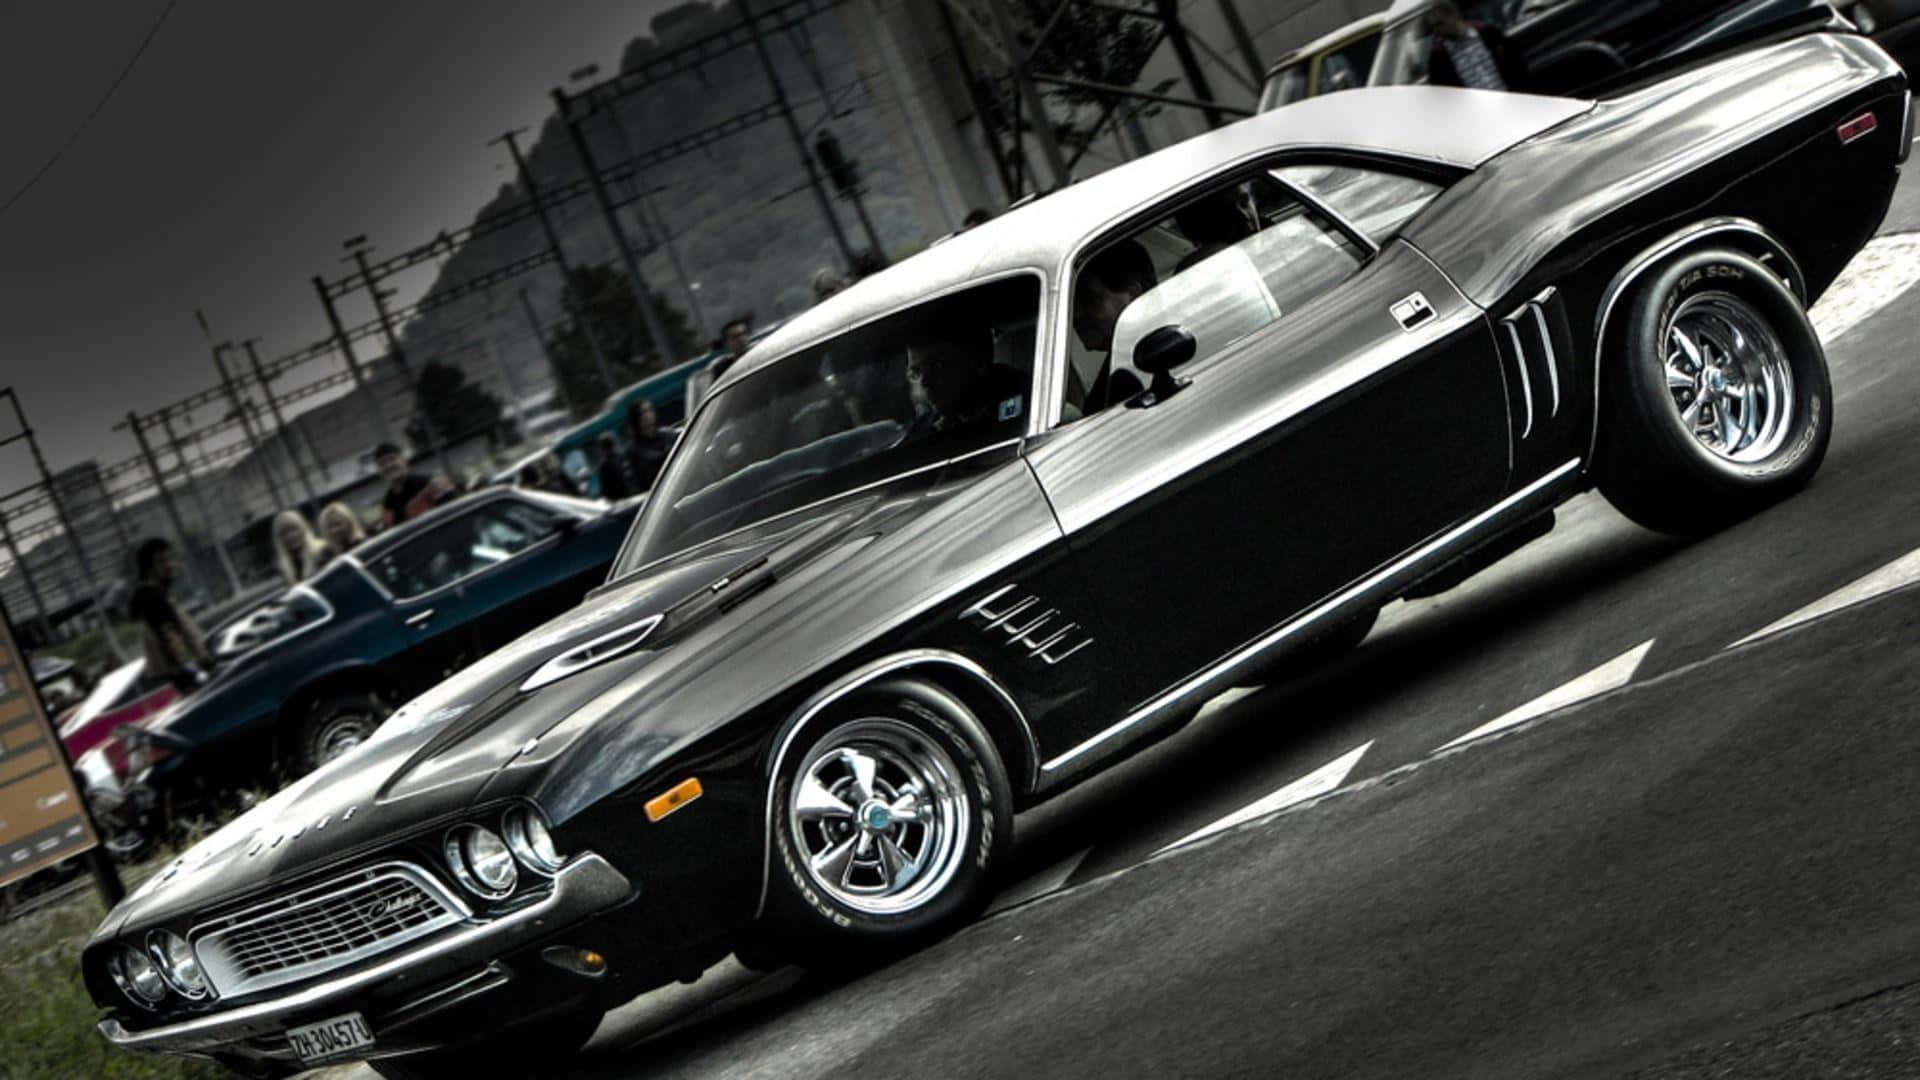 A Black And White Muscle Car Is Parked On The Street